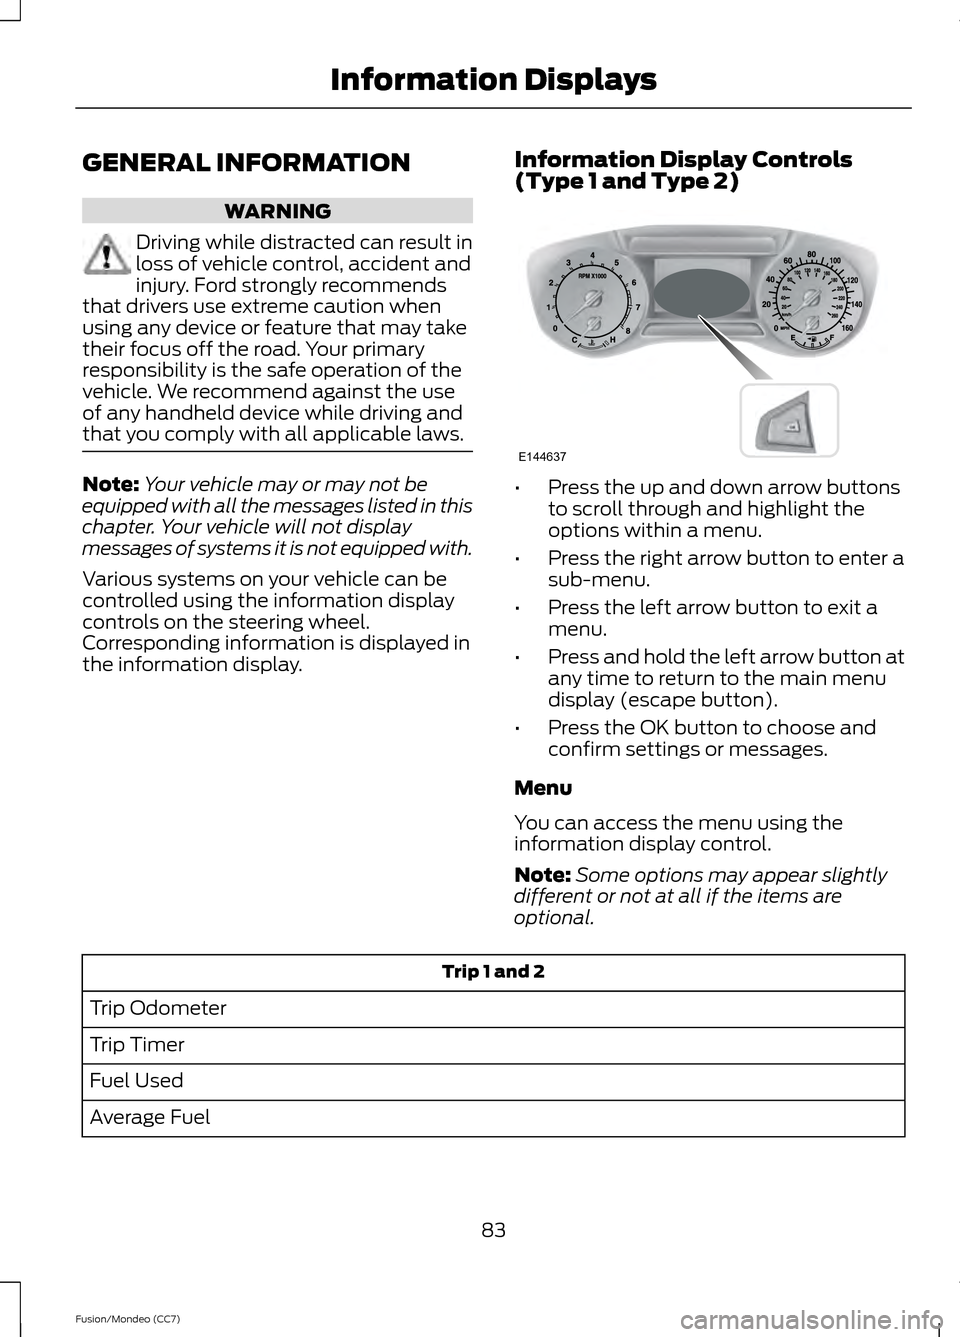 FORD FUSION (AMERICAS) 2013 2.G Owners Manual GENERAL INFORMATION
WARNING
Driving while distracted can result in
loss of vehicle control, accident and
injury. Ford strongly recommends
that drivers use extreme caution when
using any device or feat